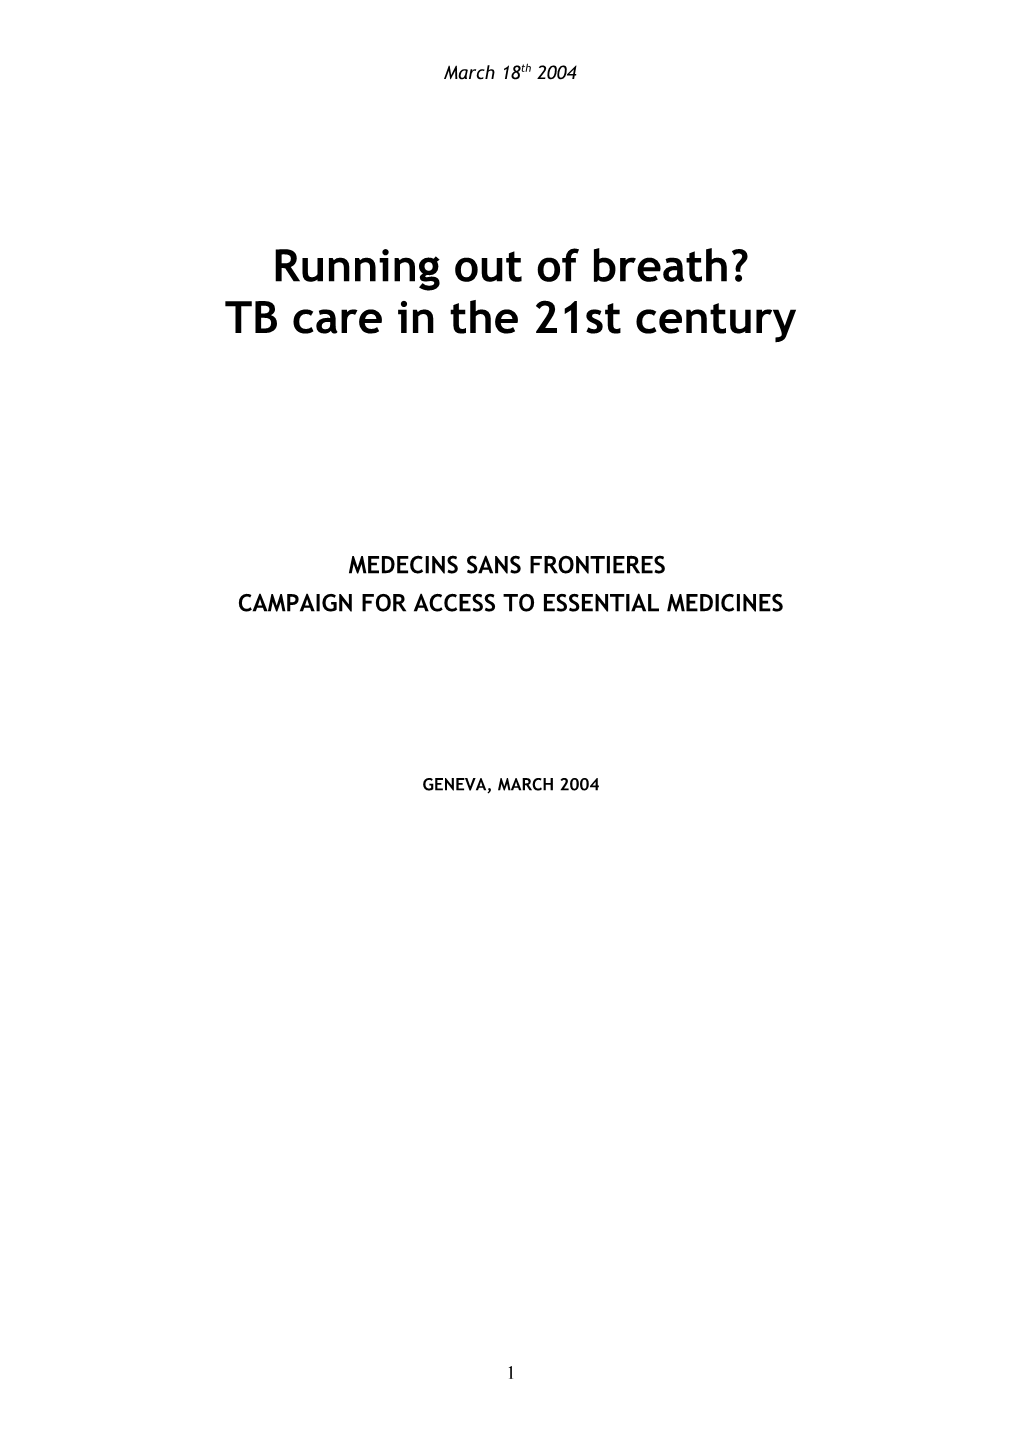 Running out of Breath?